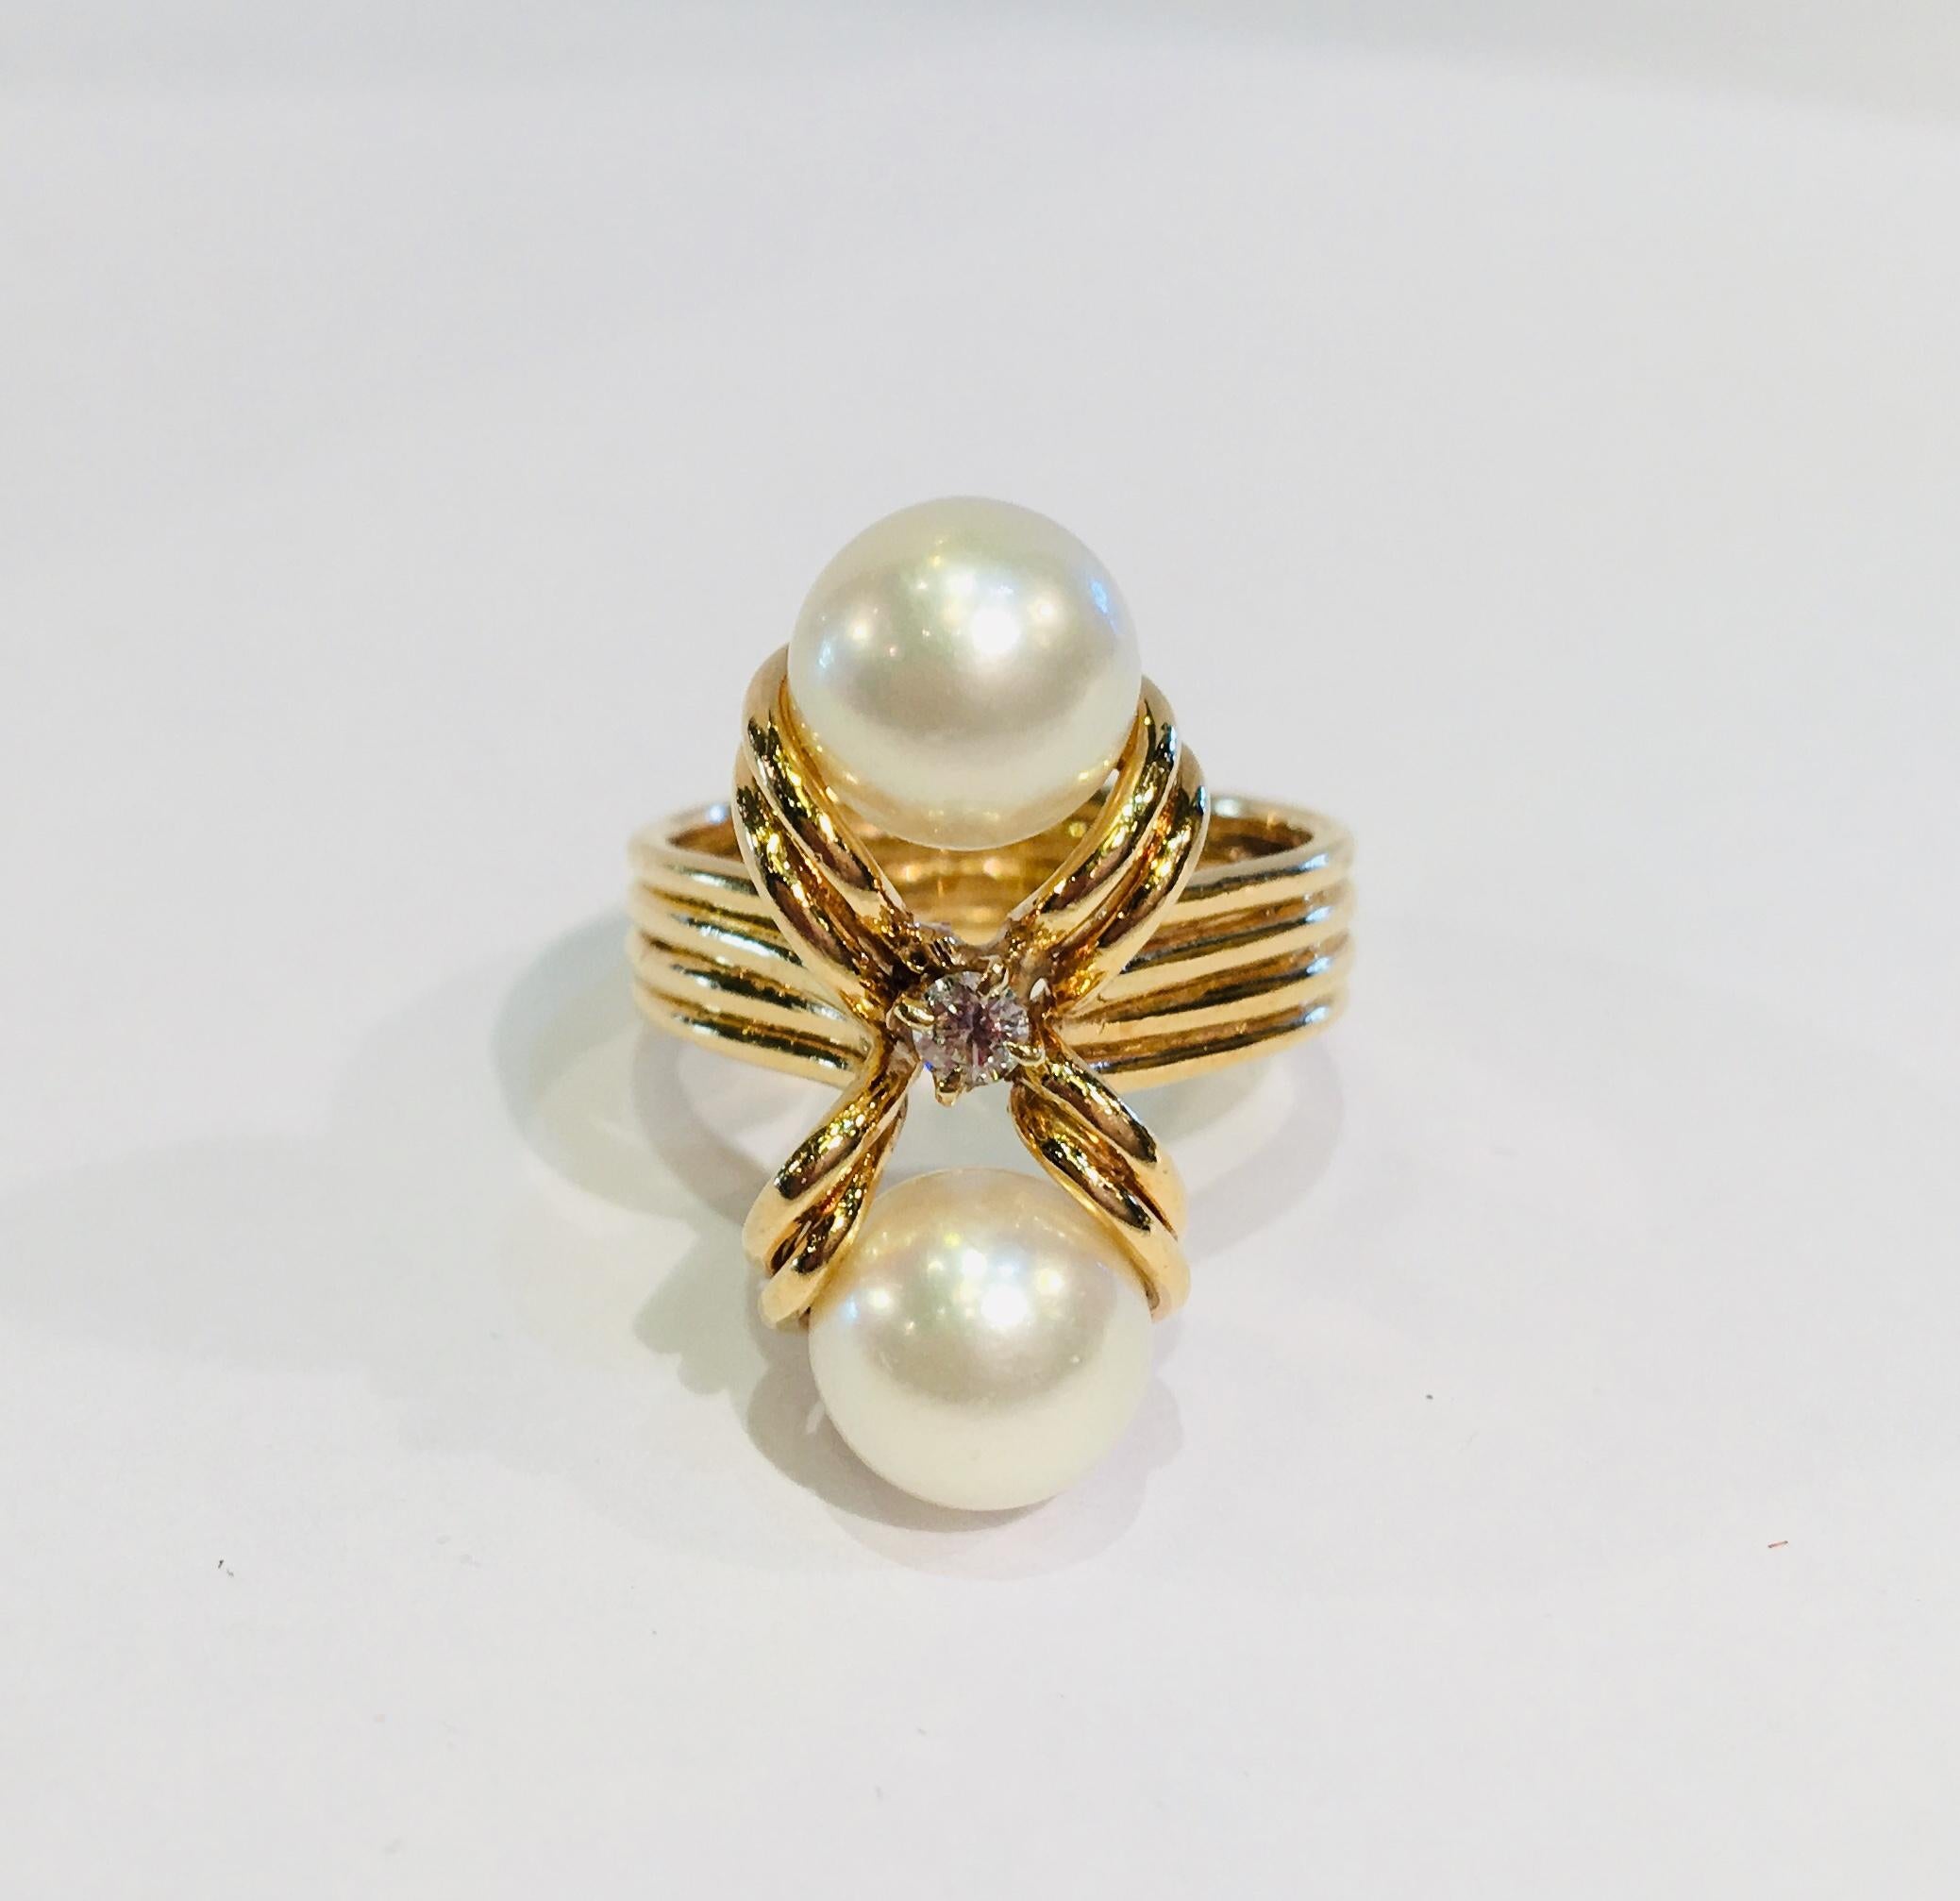 Beautifully proportioned, custom-made, 18 karat yellow gold estate ring features a pair of 2 round white cultured pearls with a beautiful luster, separated by an 